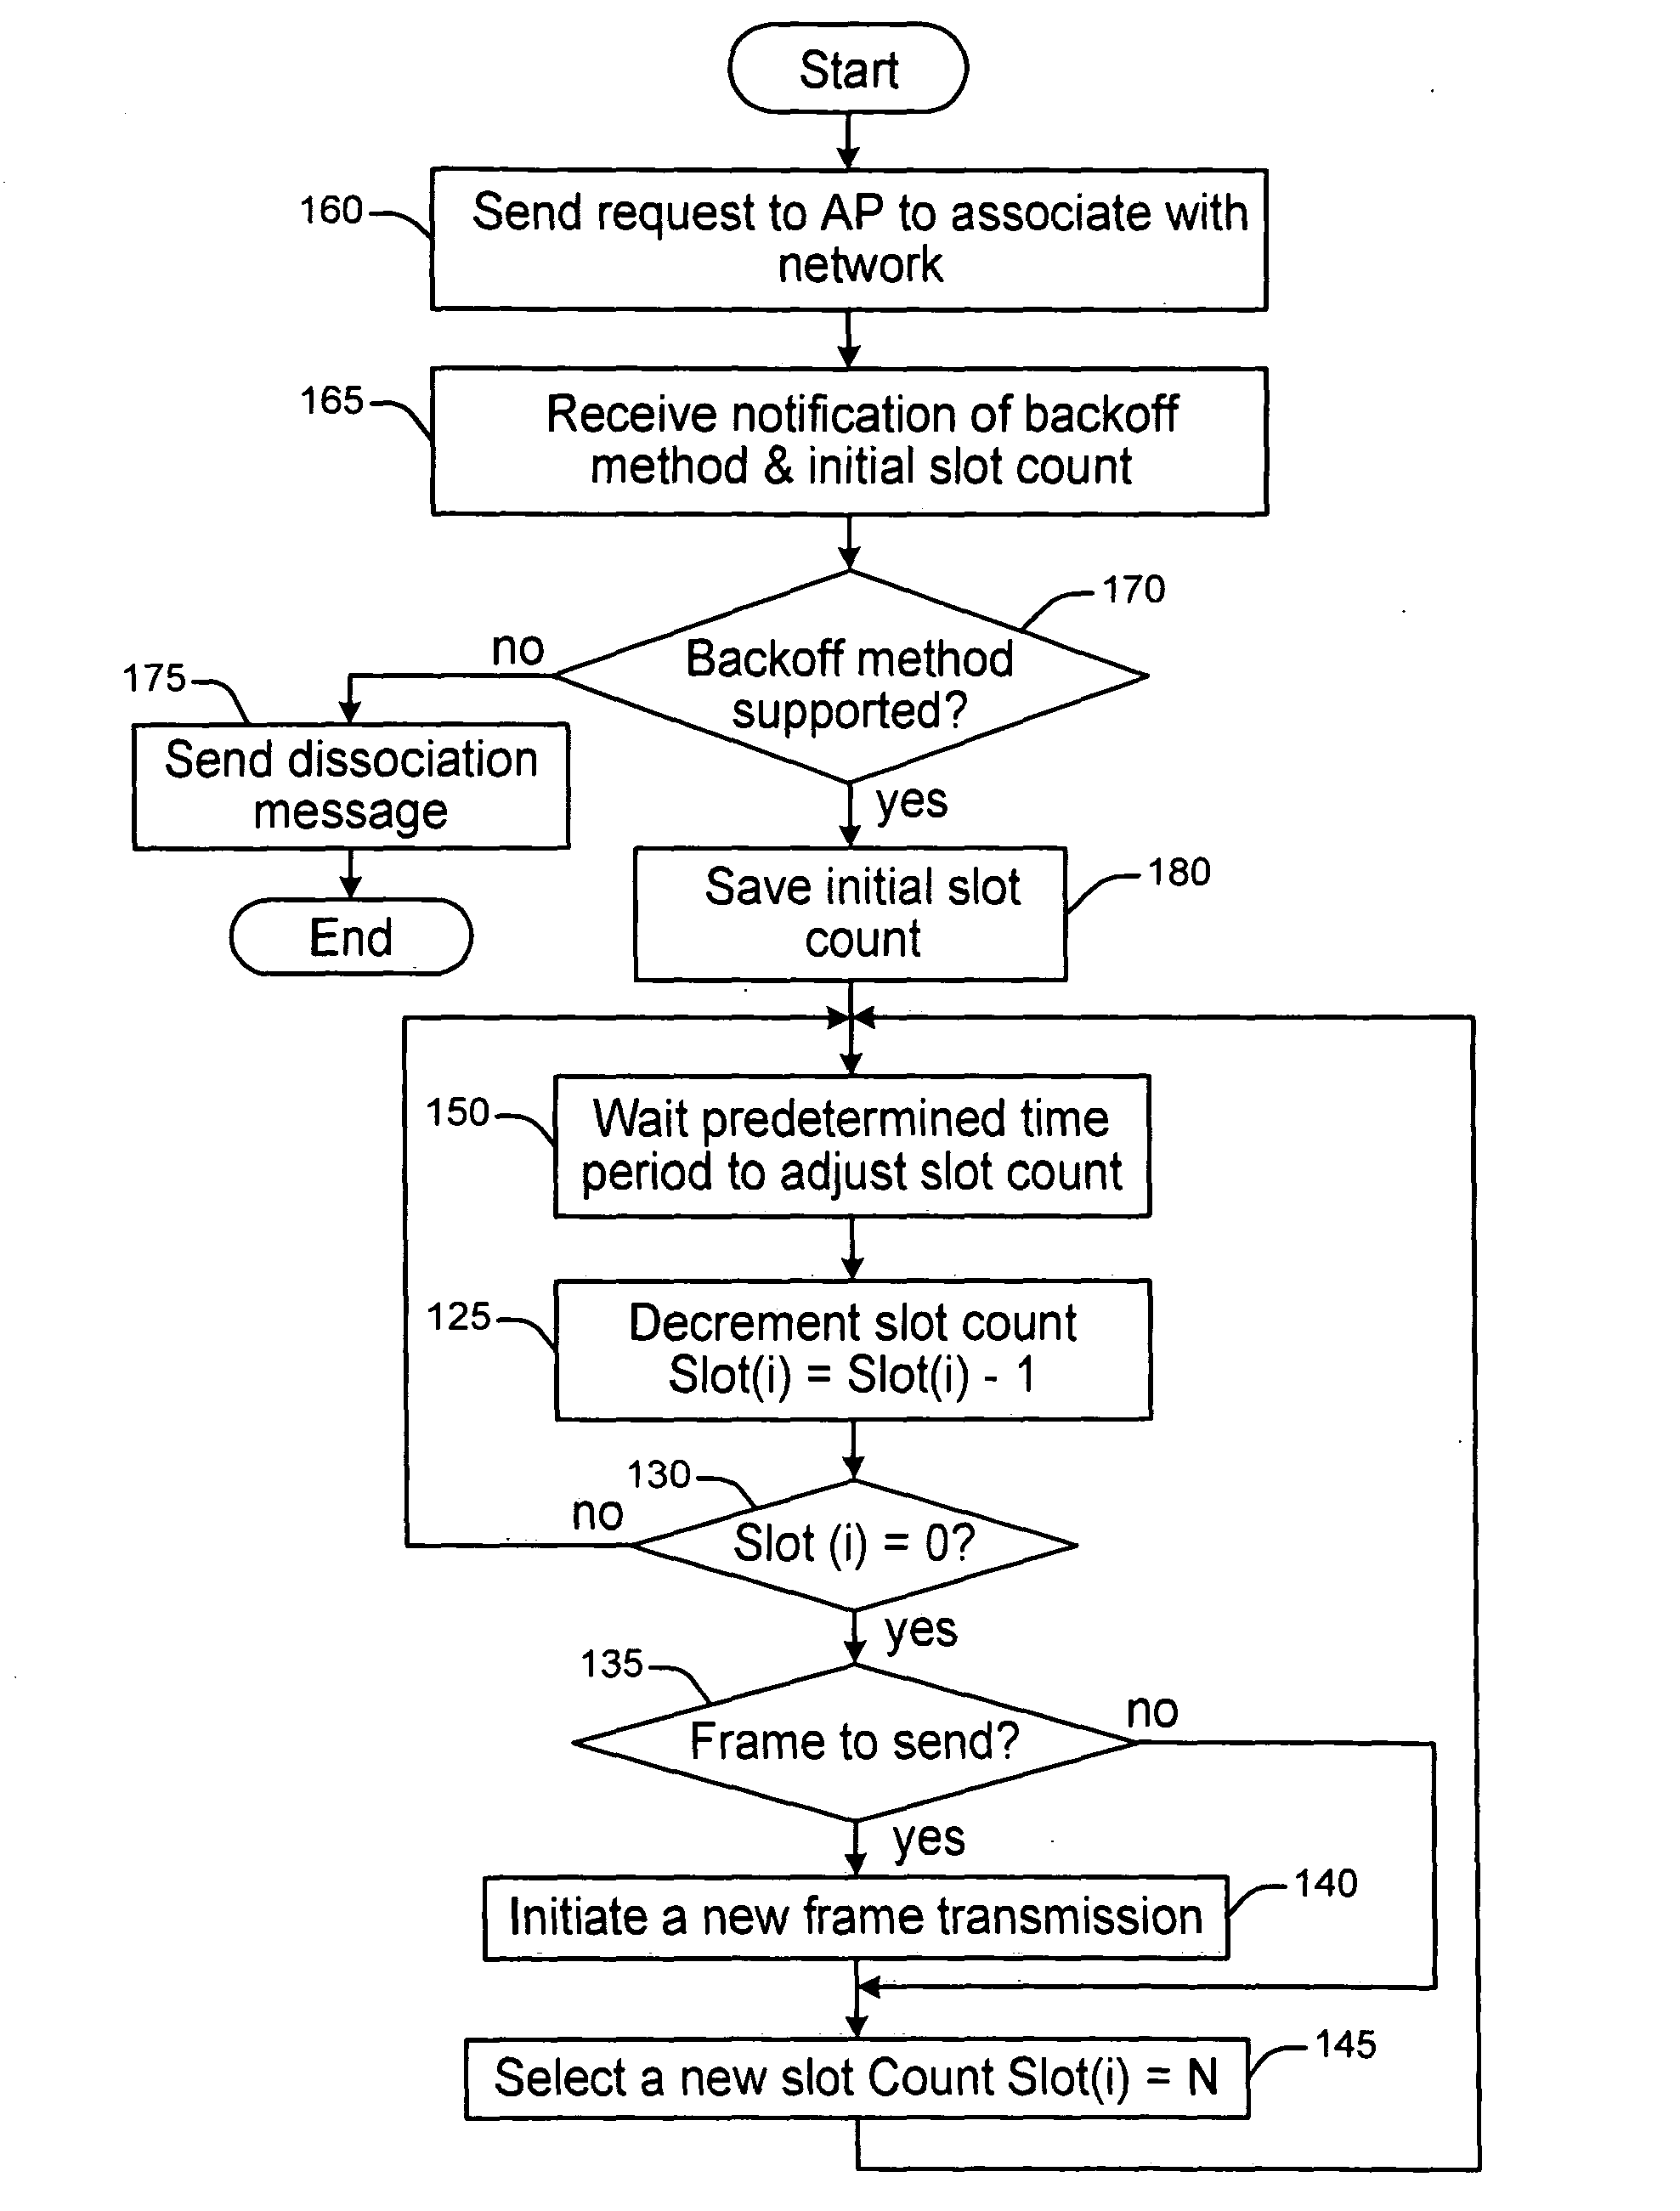 Relaxed deterministic back-off method for medium access control